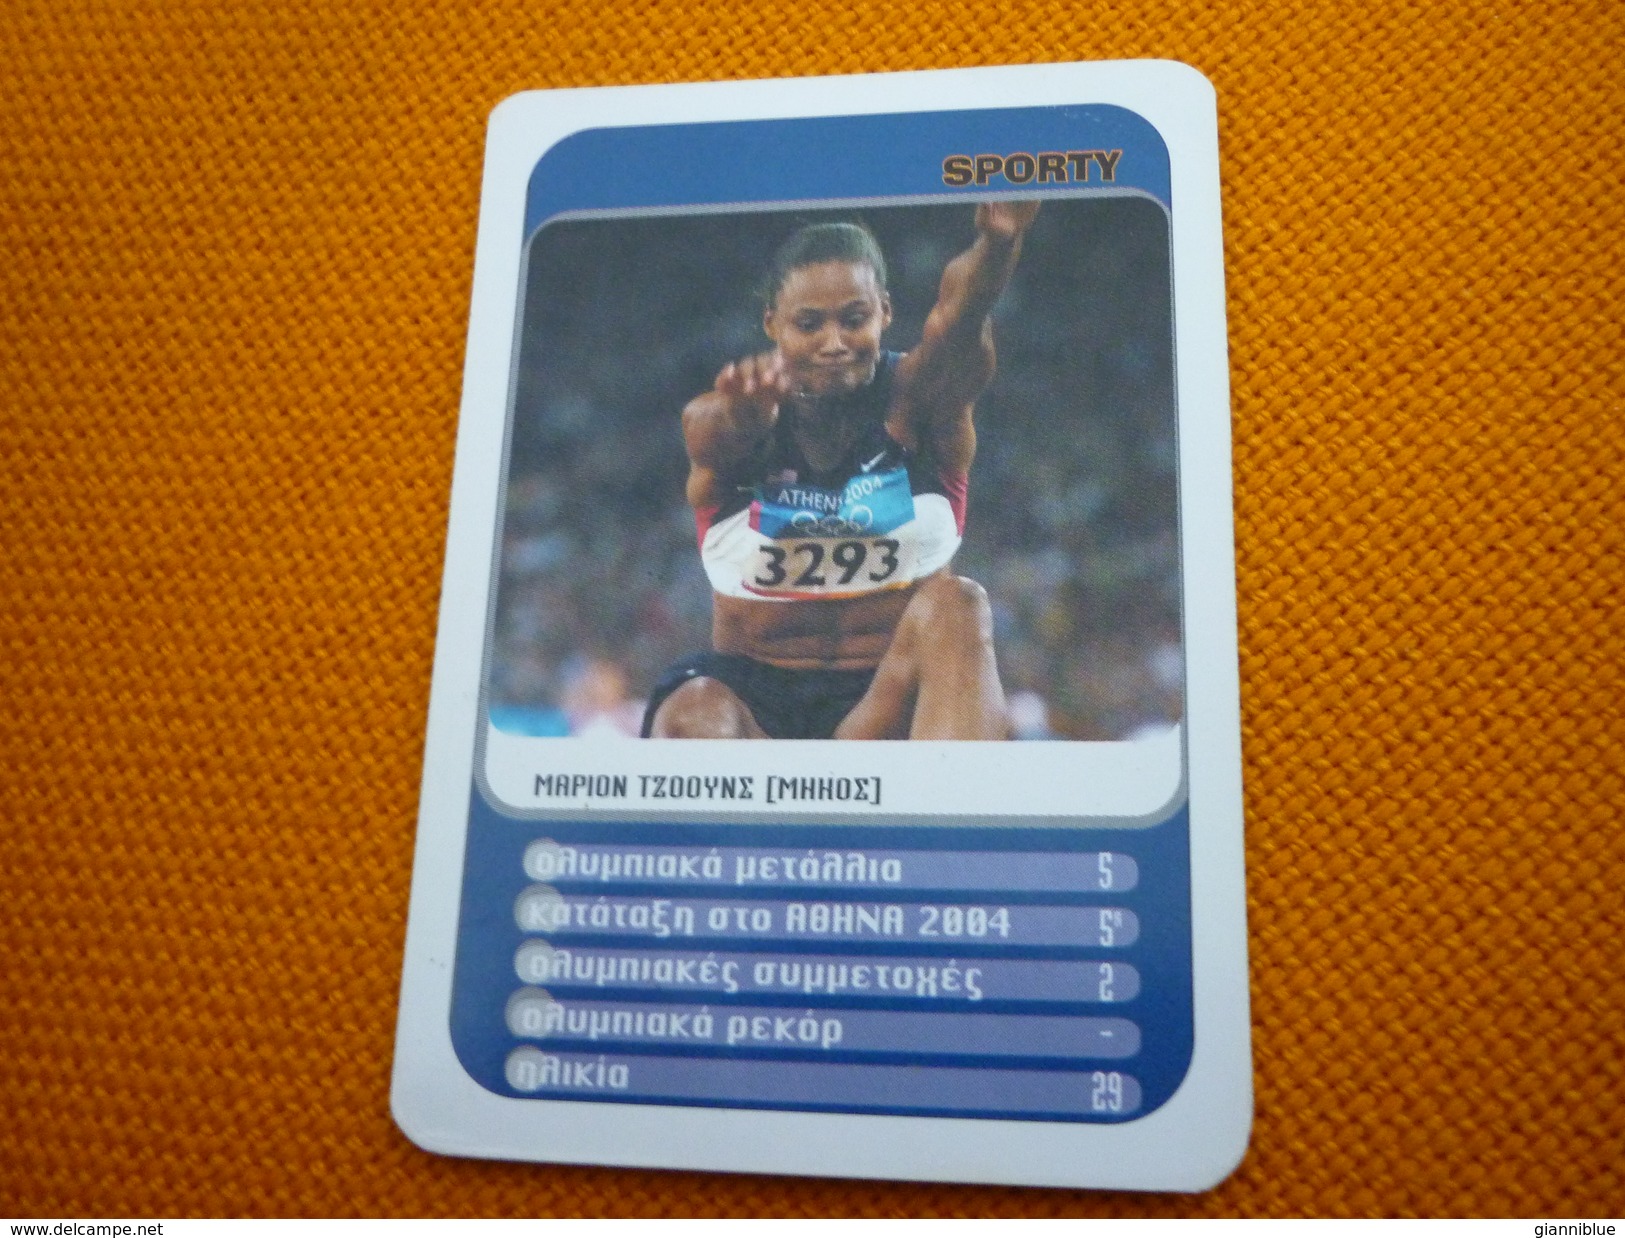 Marion Jones American Track & Field Runner Run Athlete Athens 2004 Olympic Games Greece Greek Trading Card - Trading Cards